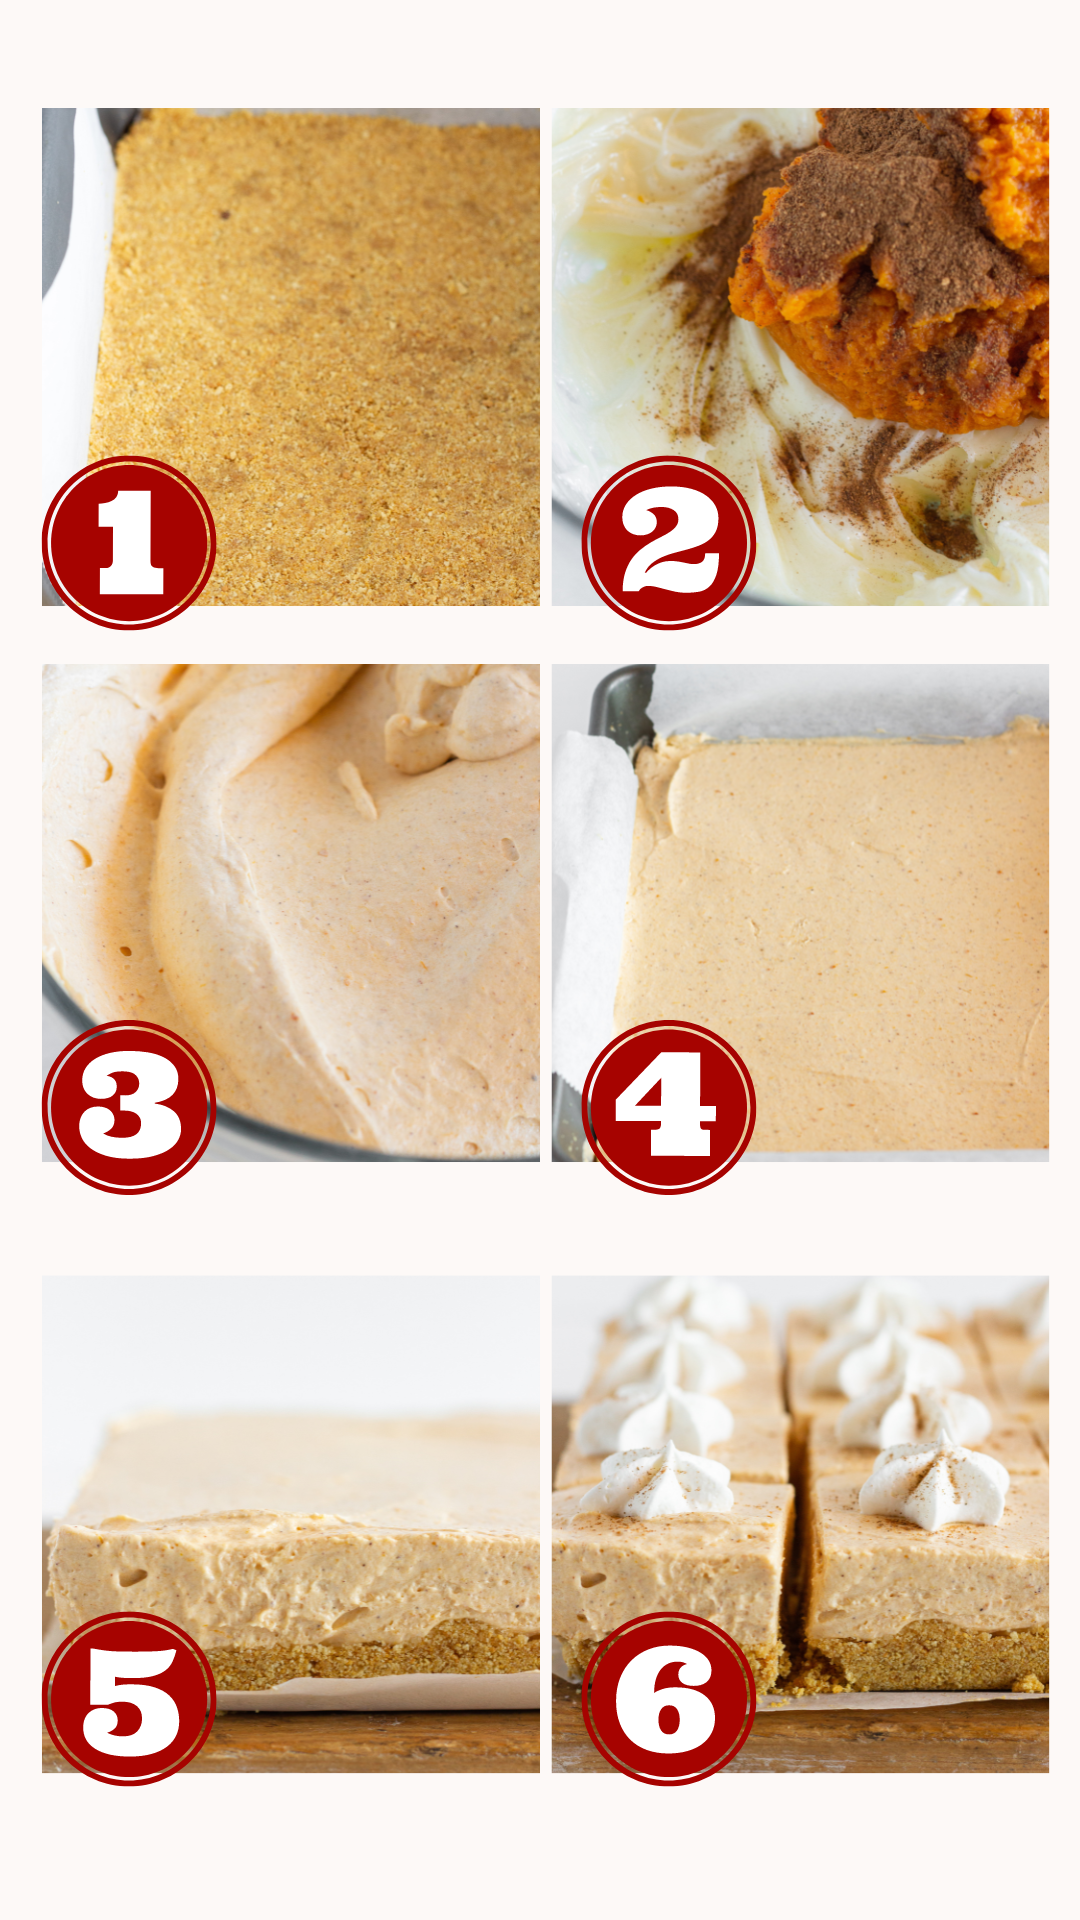 Steps for making No Bake Pumpkin Cheesecake Bars, by Top US dessert blog Practically Homemade